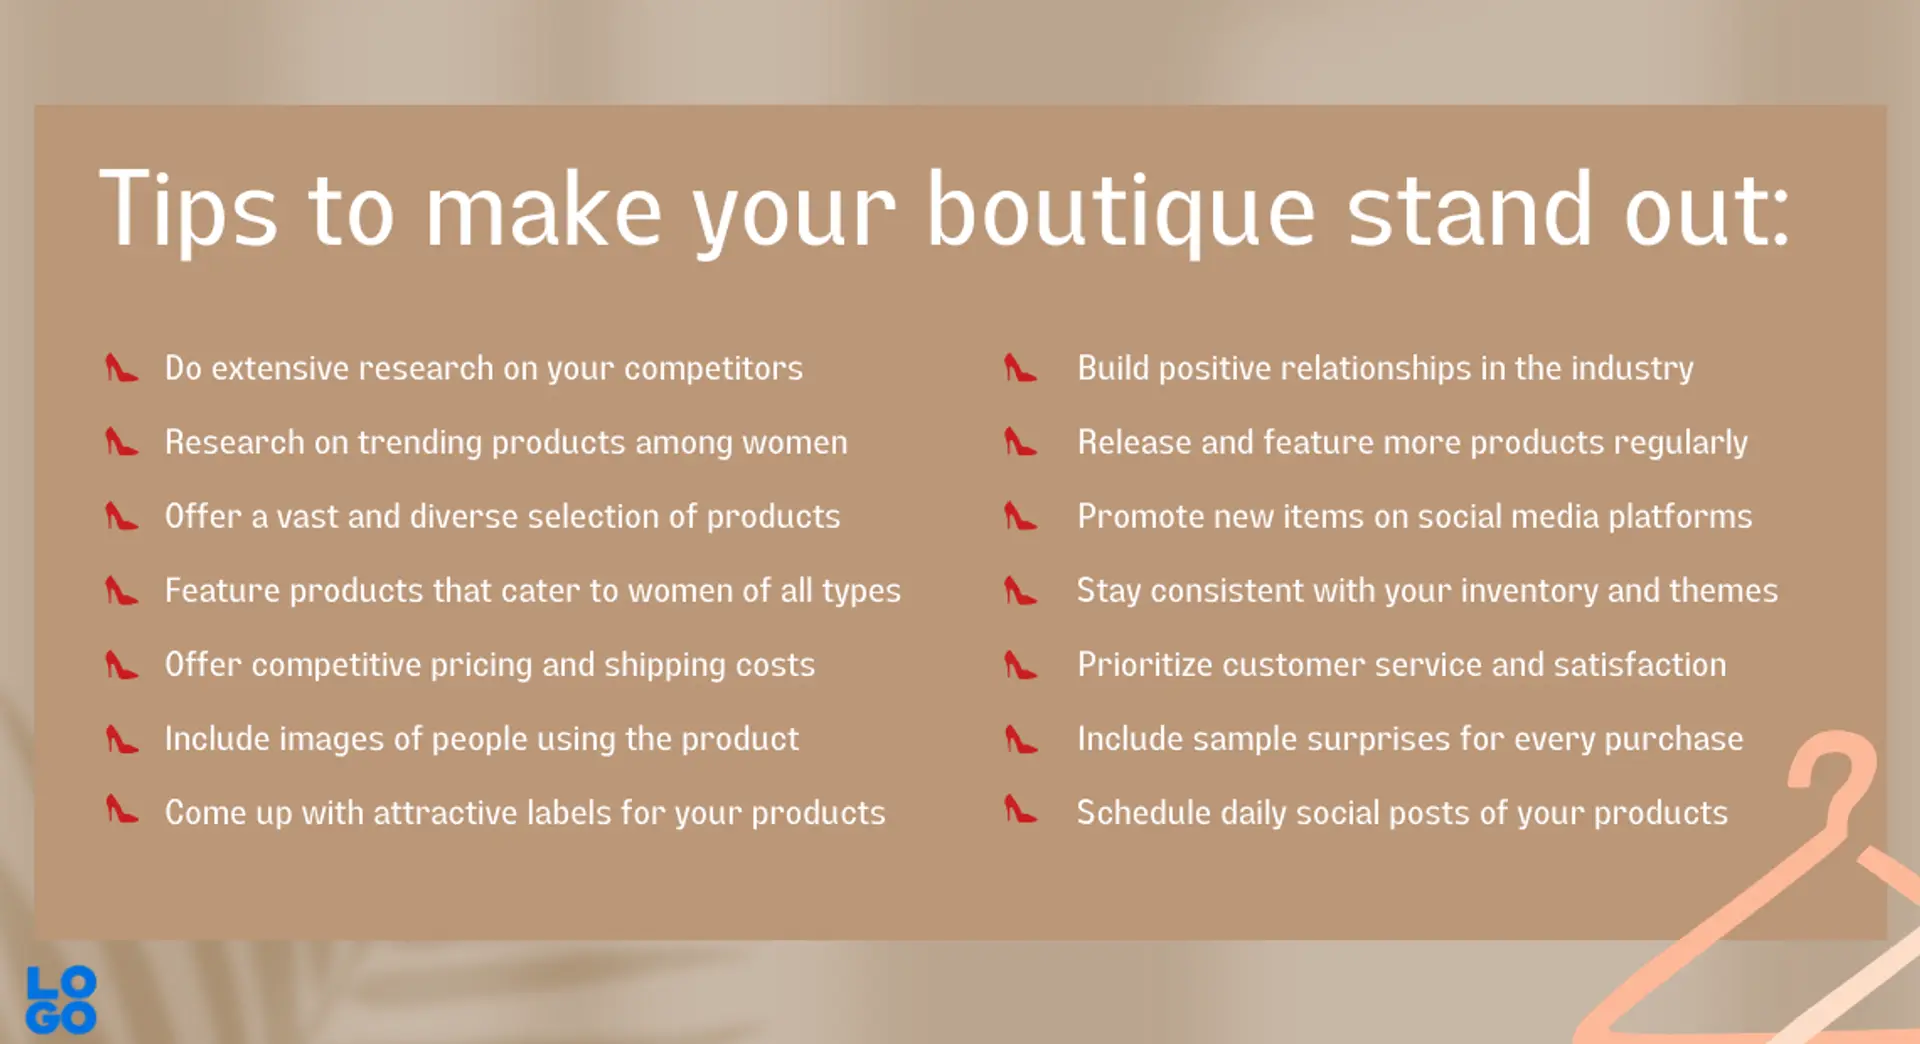 Tips to promote your boutique and stand out